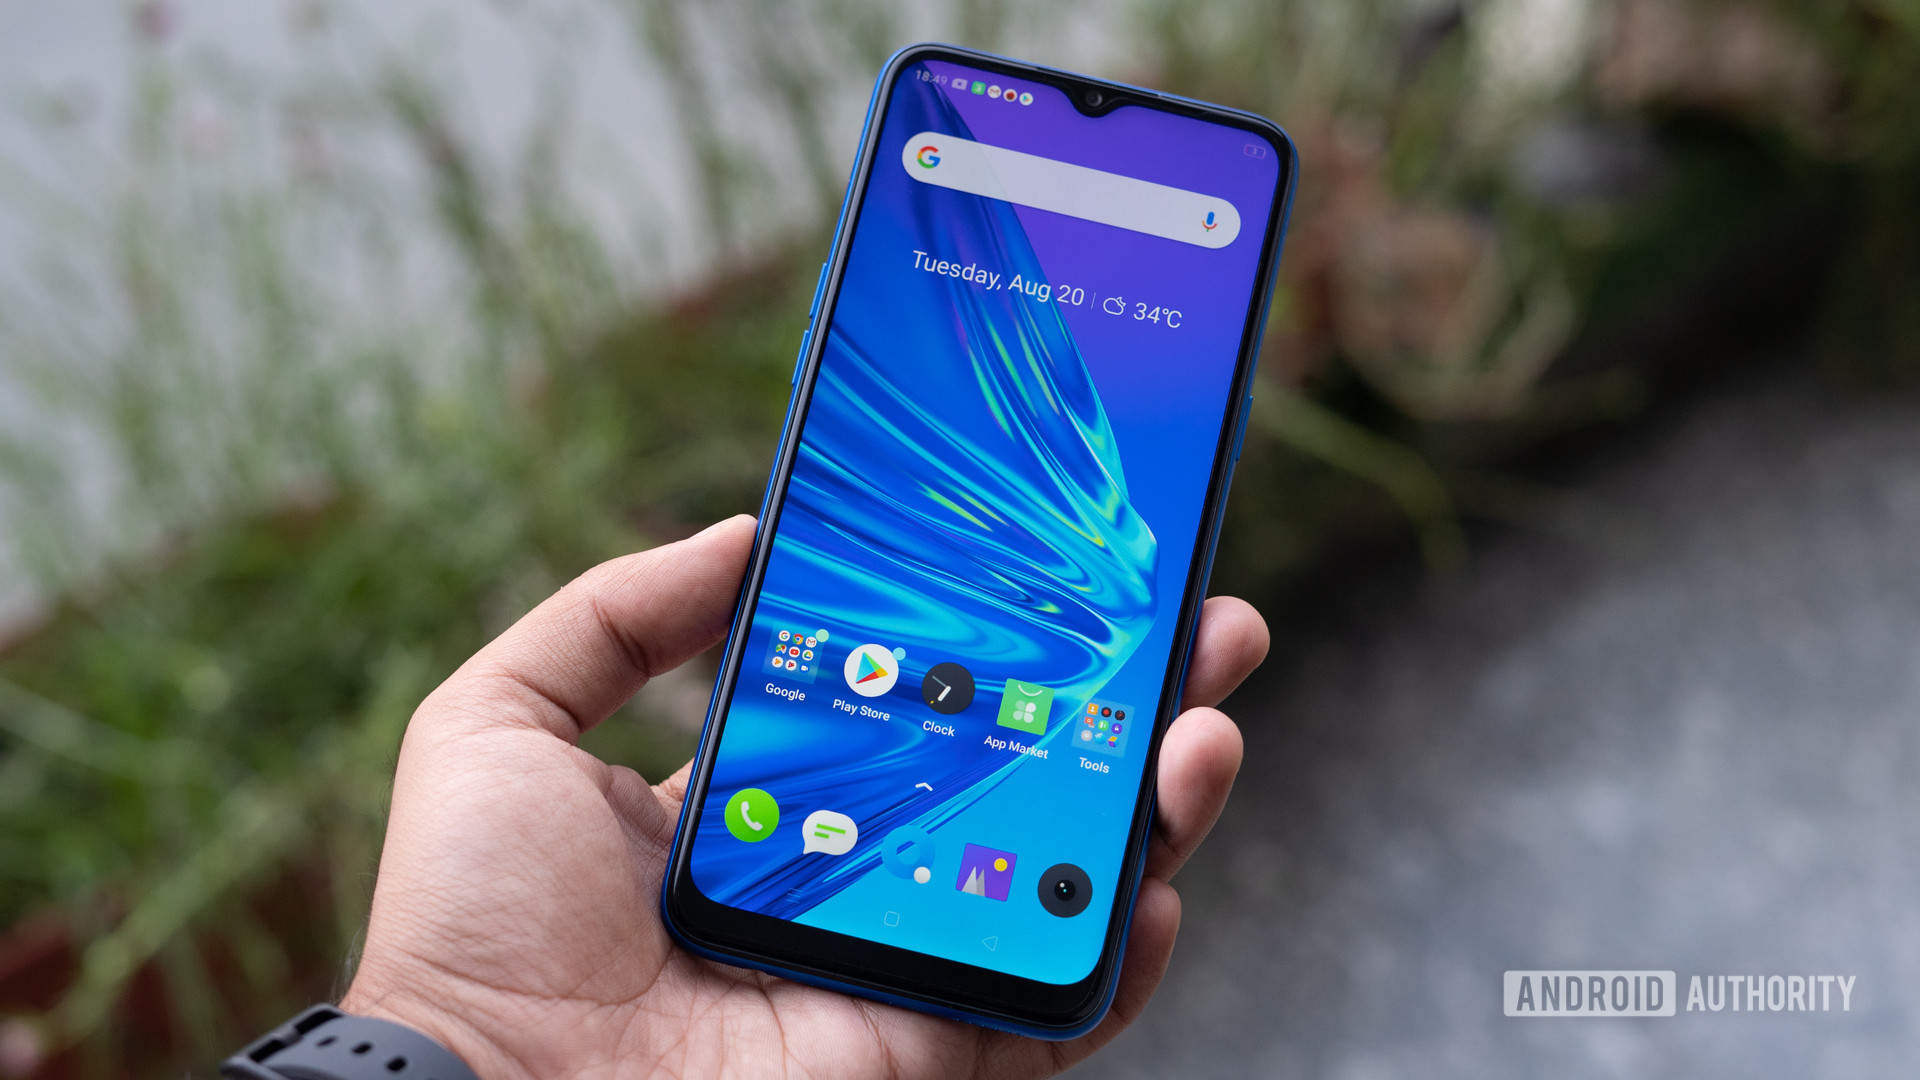 realme 5 in hand showing display and homescreen